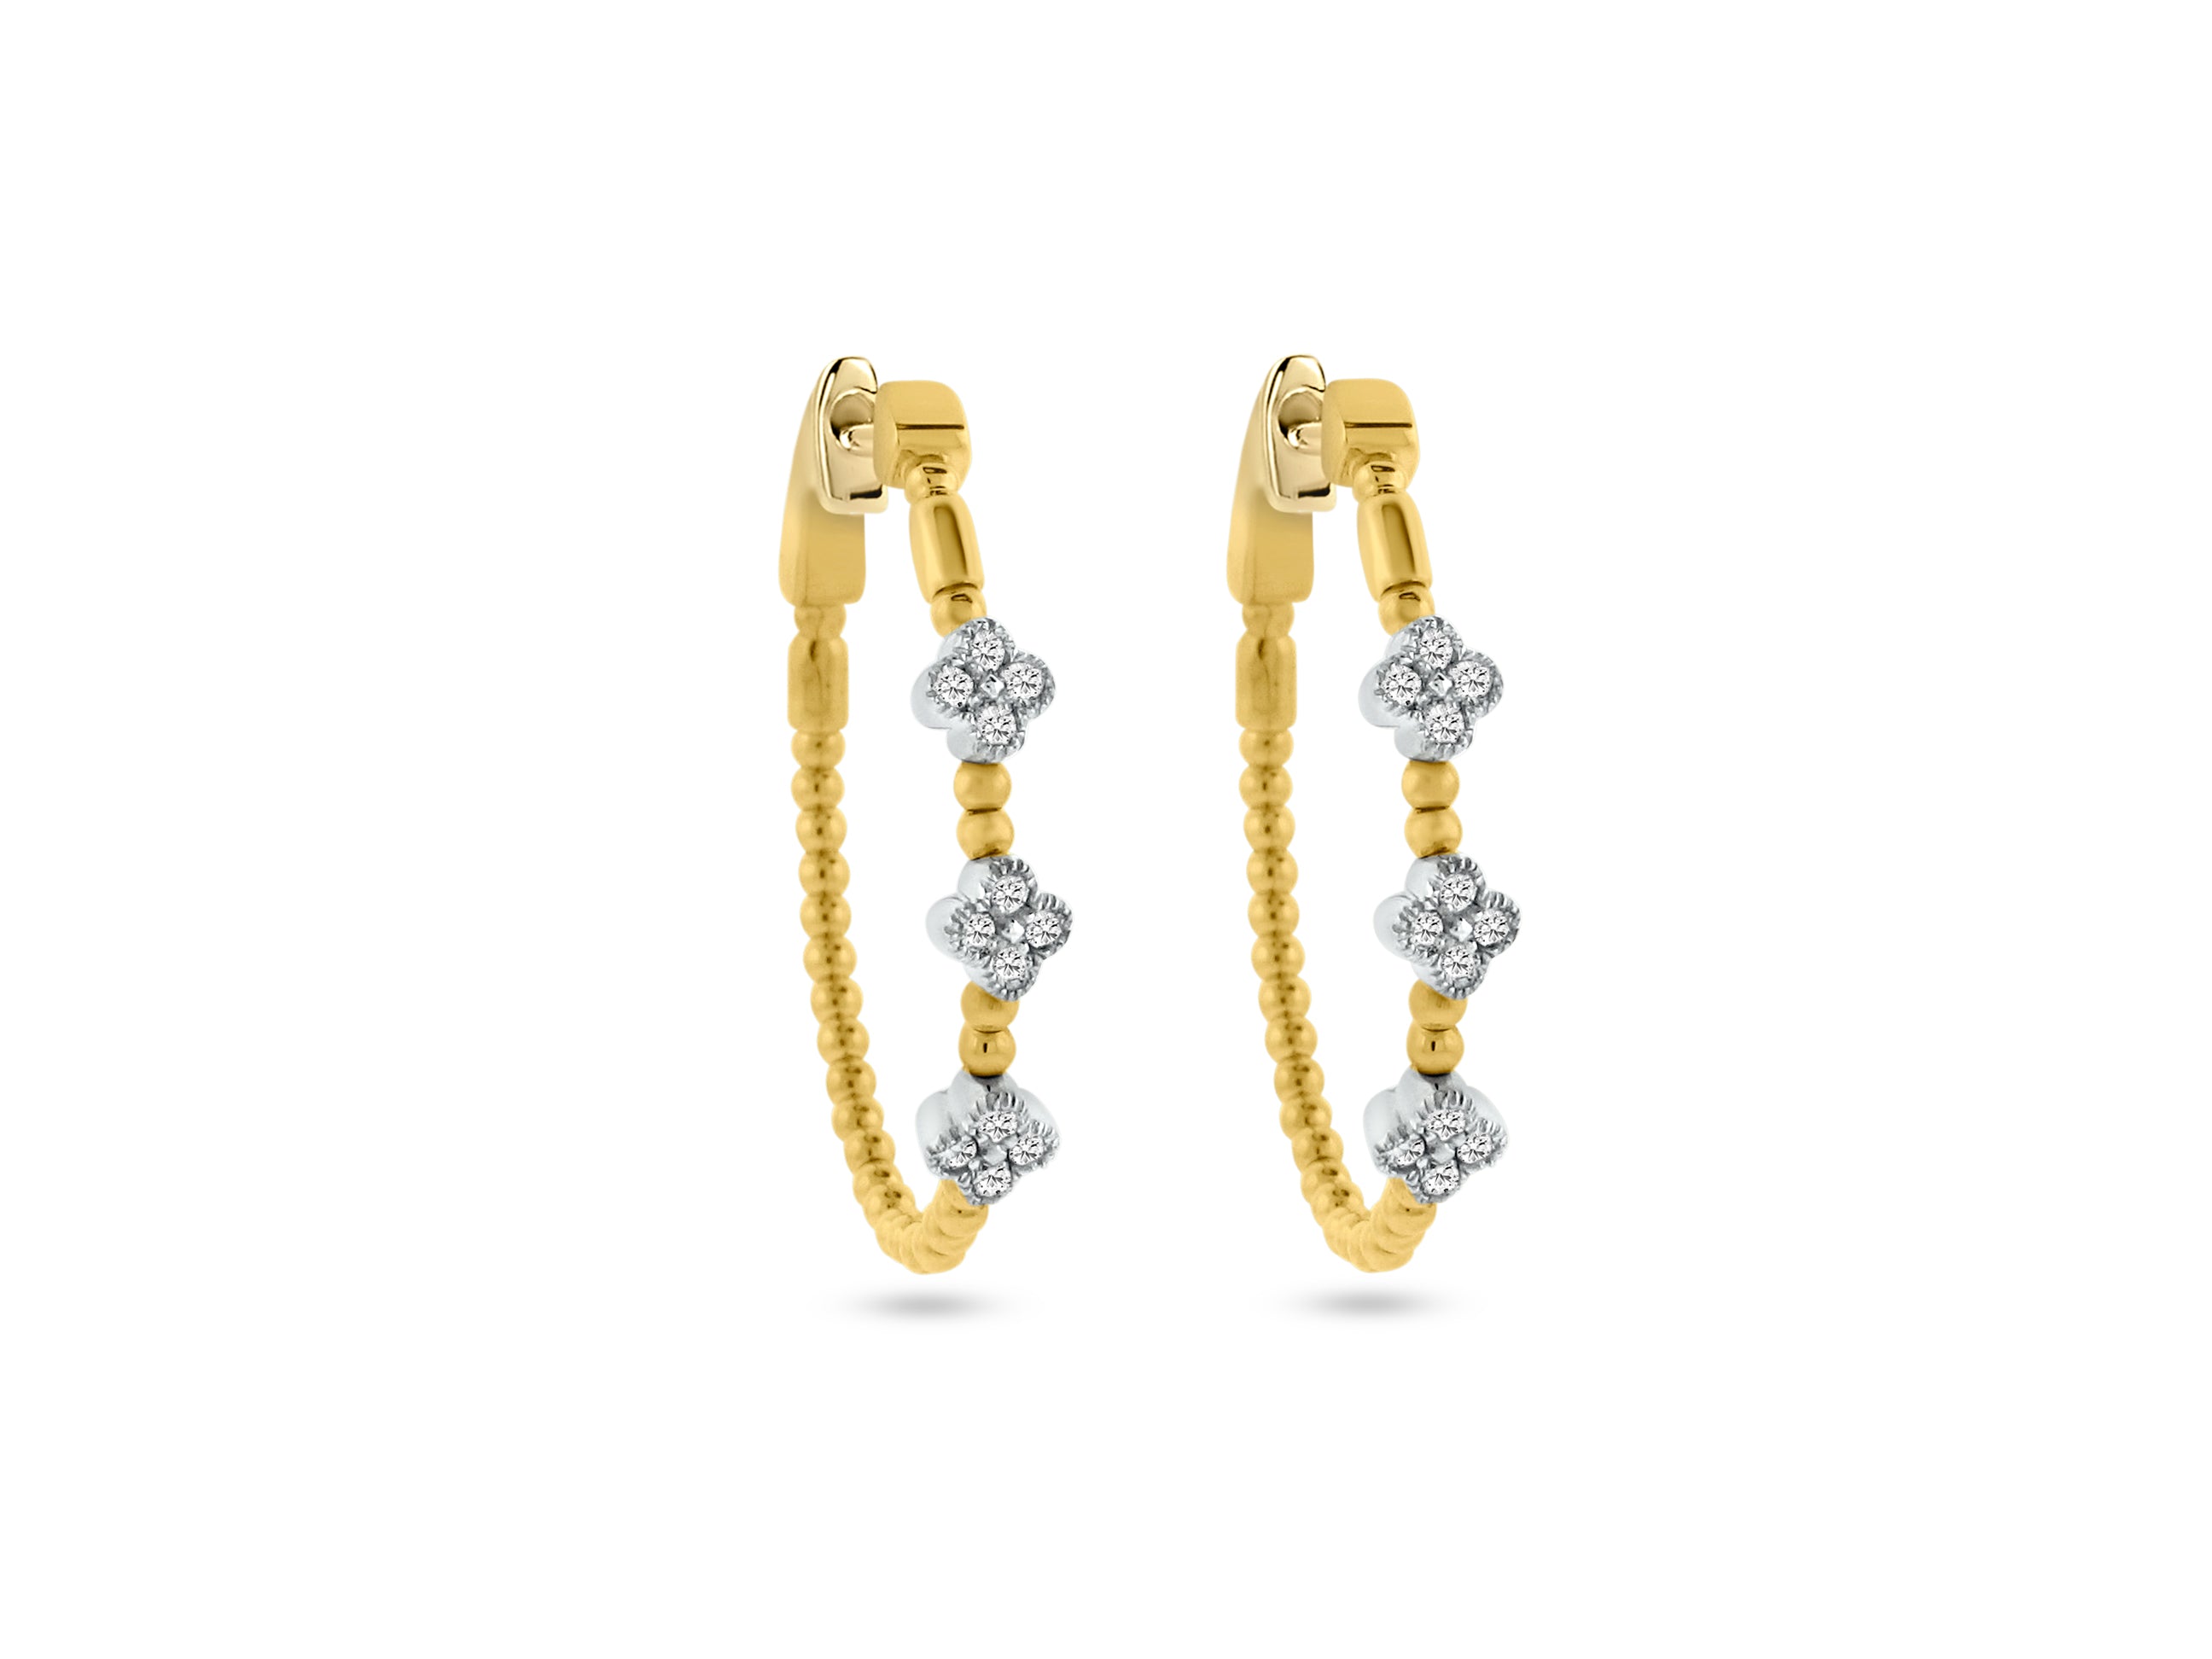 MULLOYS PRIVE'14K YELLOW AND WHITE GOLD .30CT SI1-2 CLARITY AND G-H COLOR DIAMOND CLOVER HOOPS